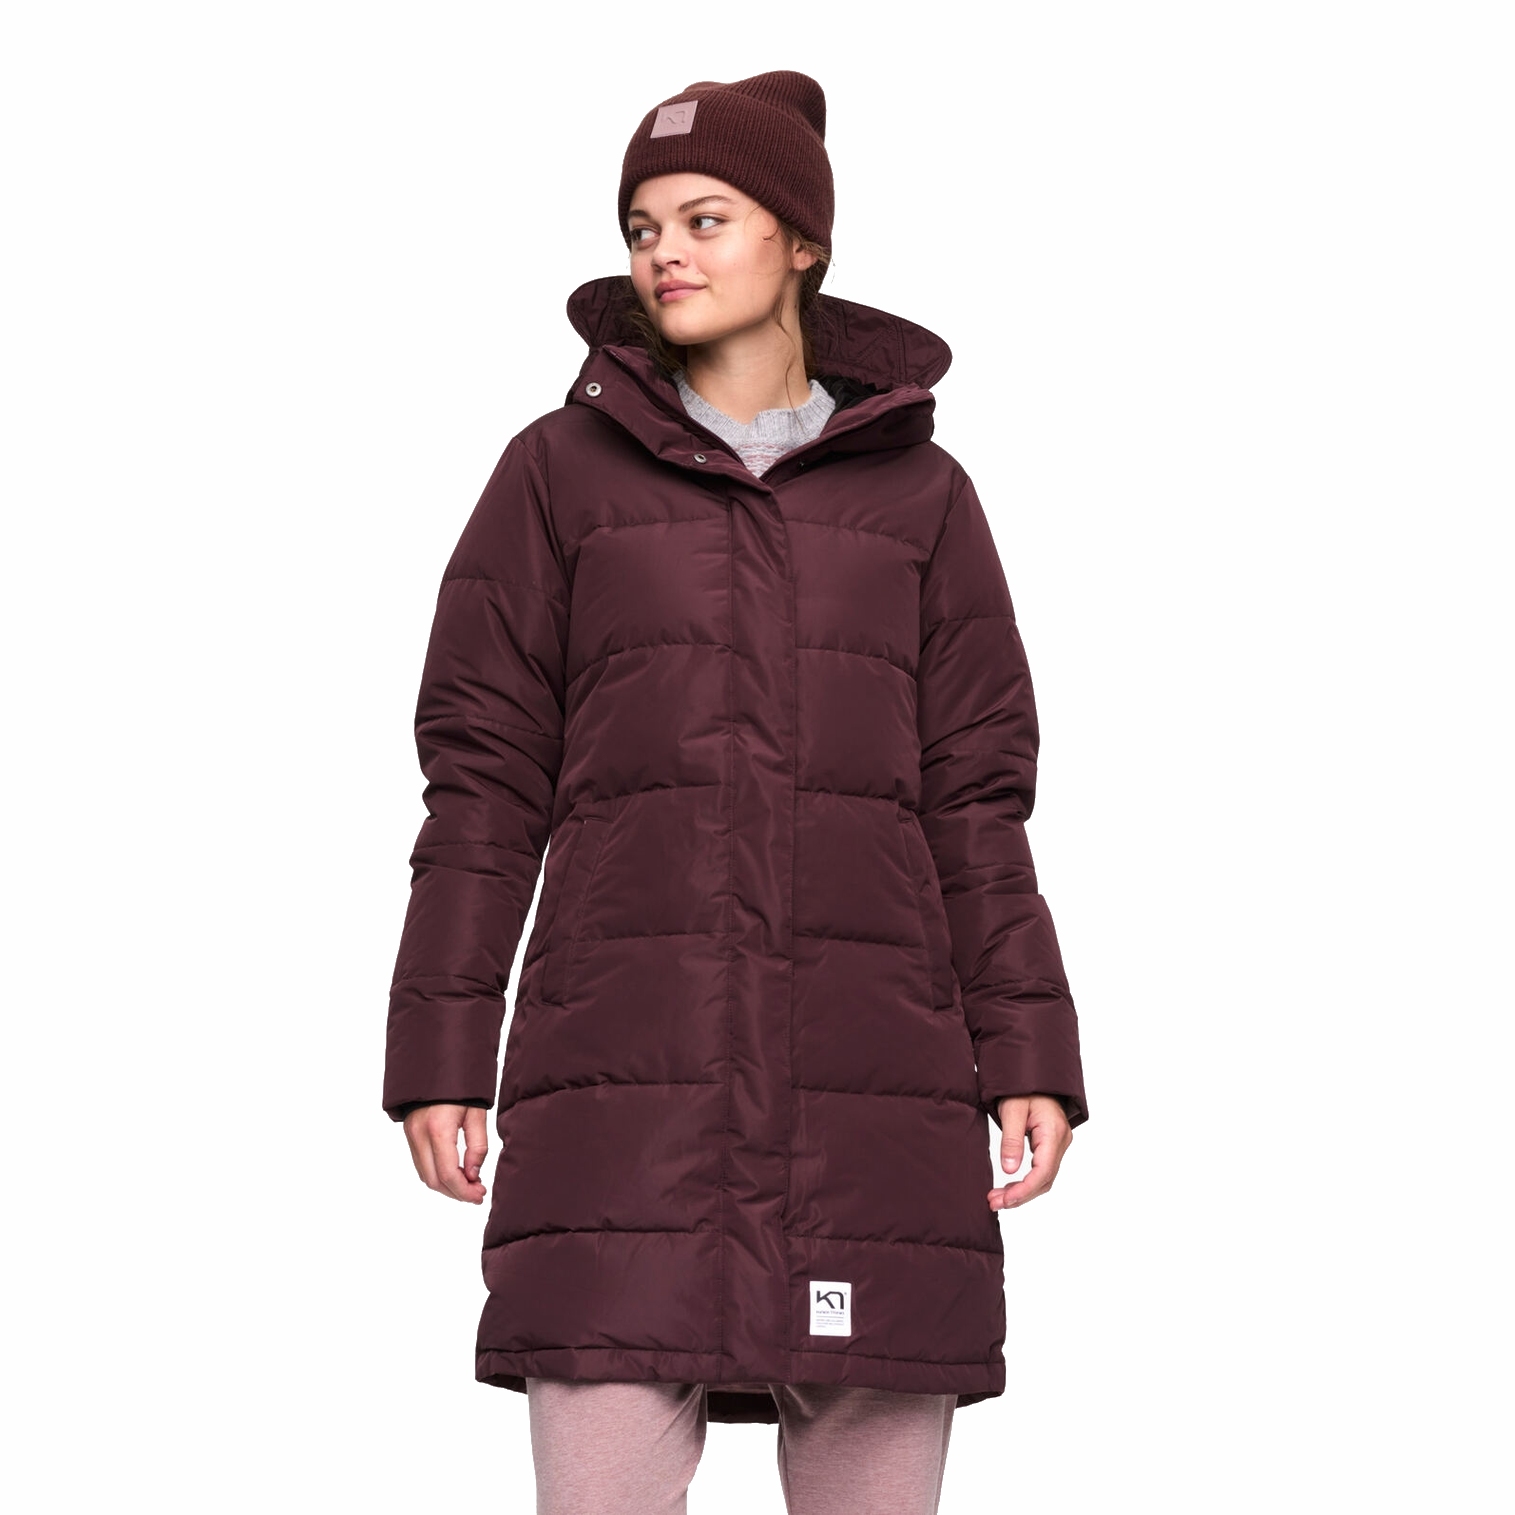 Picture of Kari Traa Kyte Parka Women - syrup